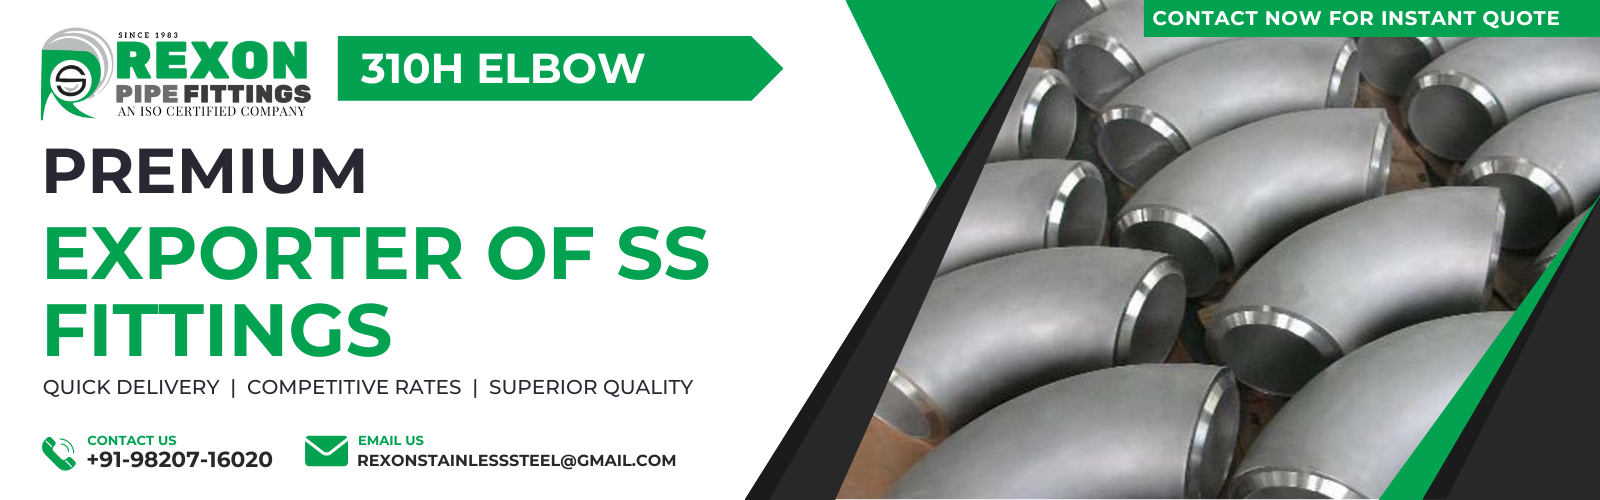 ASTM 310H Stainless Steel ButtWelded Elbow Pipe Fitting Manufacturer